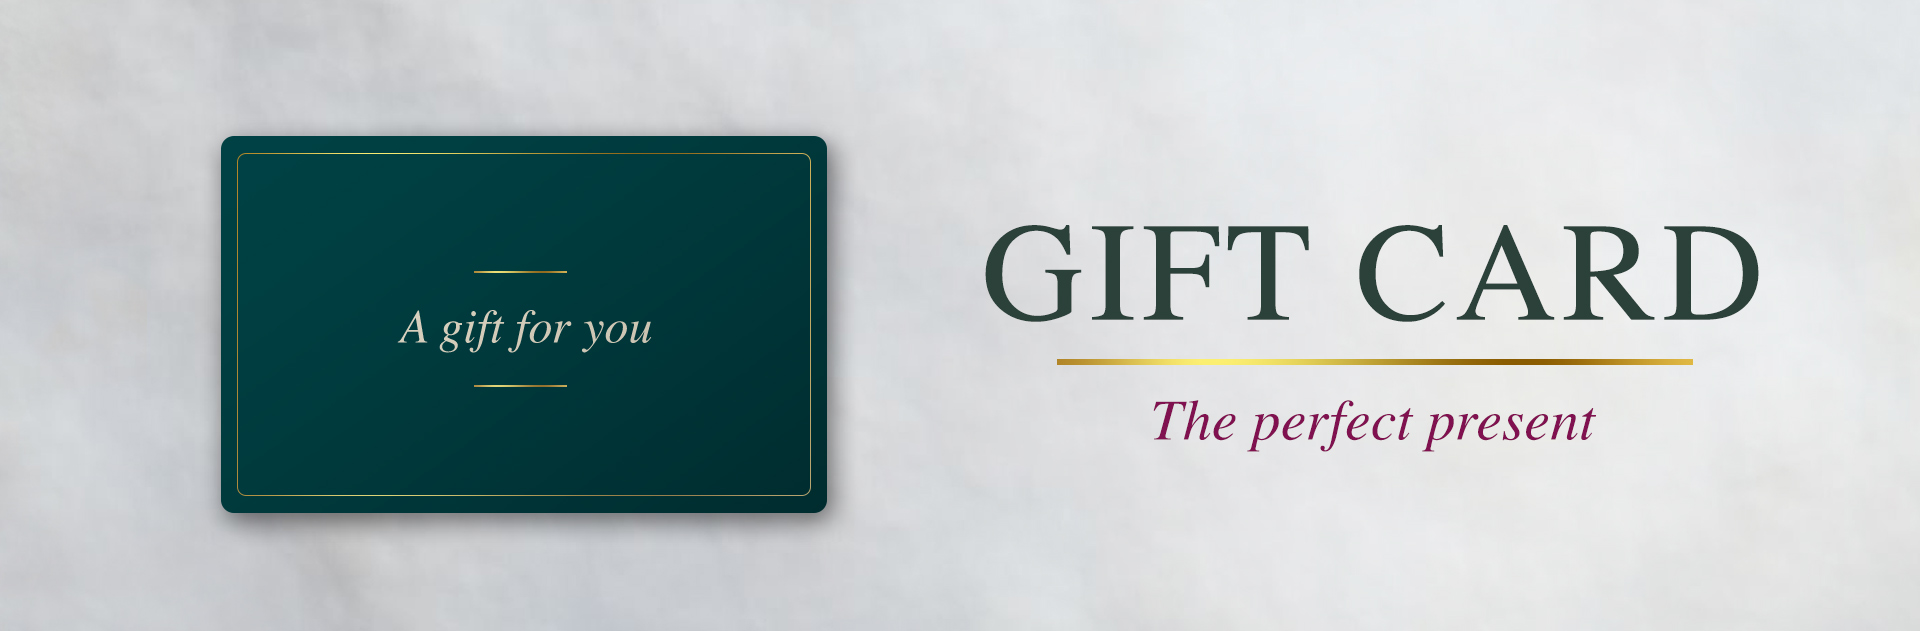 The King William IV Gift Card